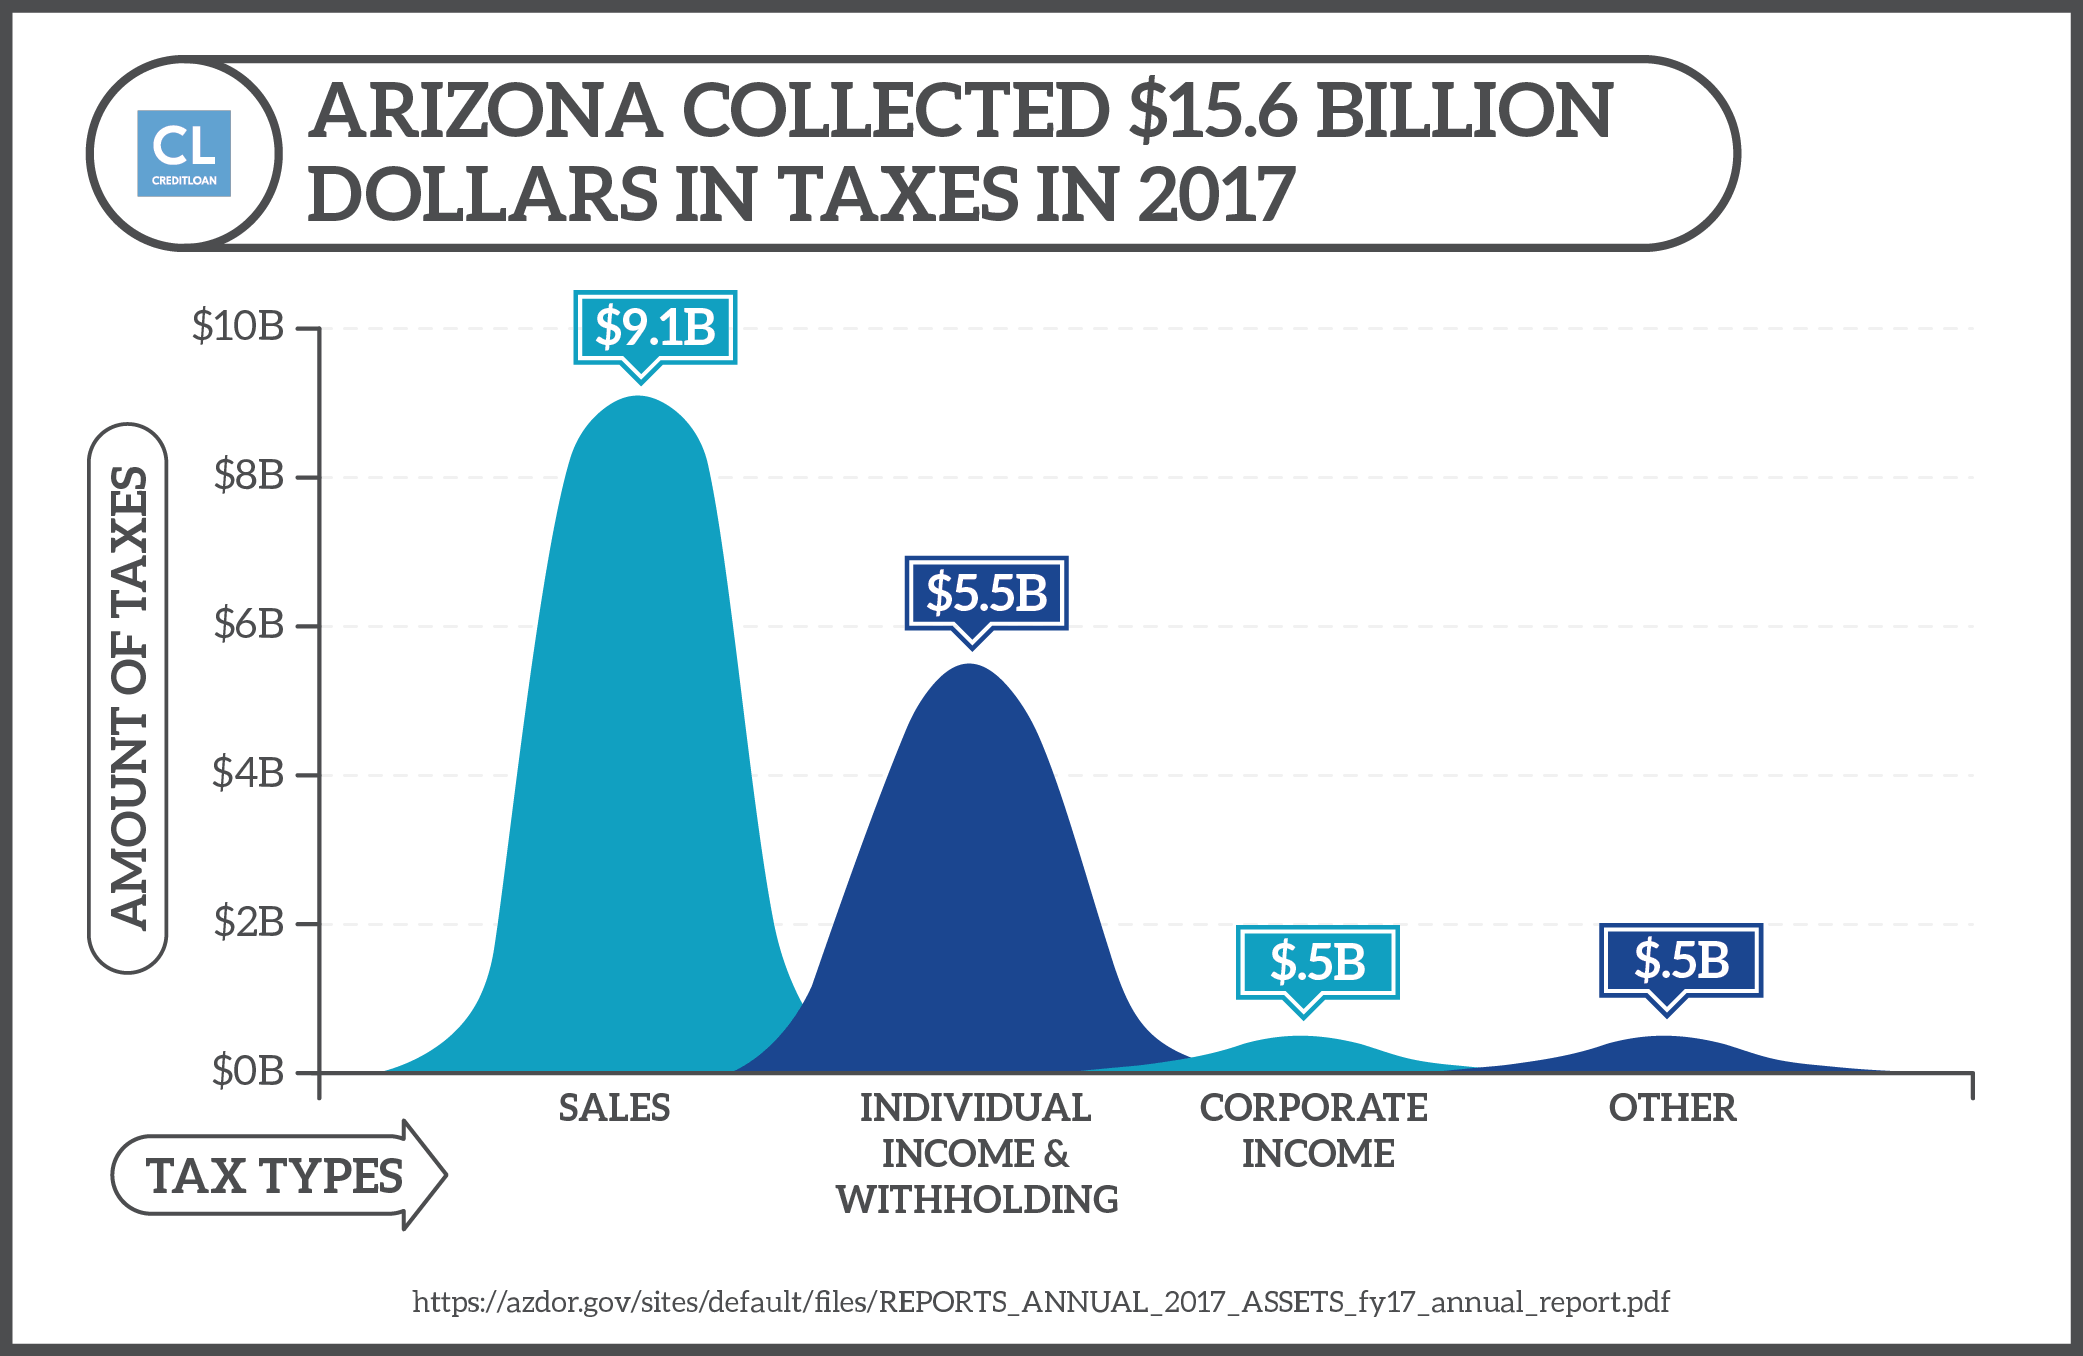 Arizona Tax Dollars Collected by Source